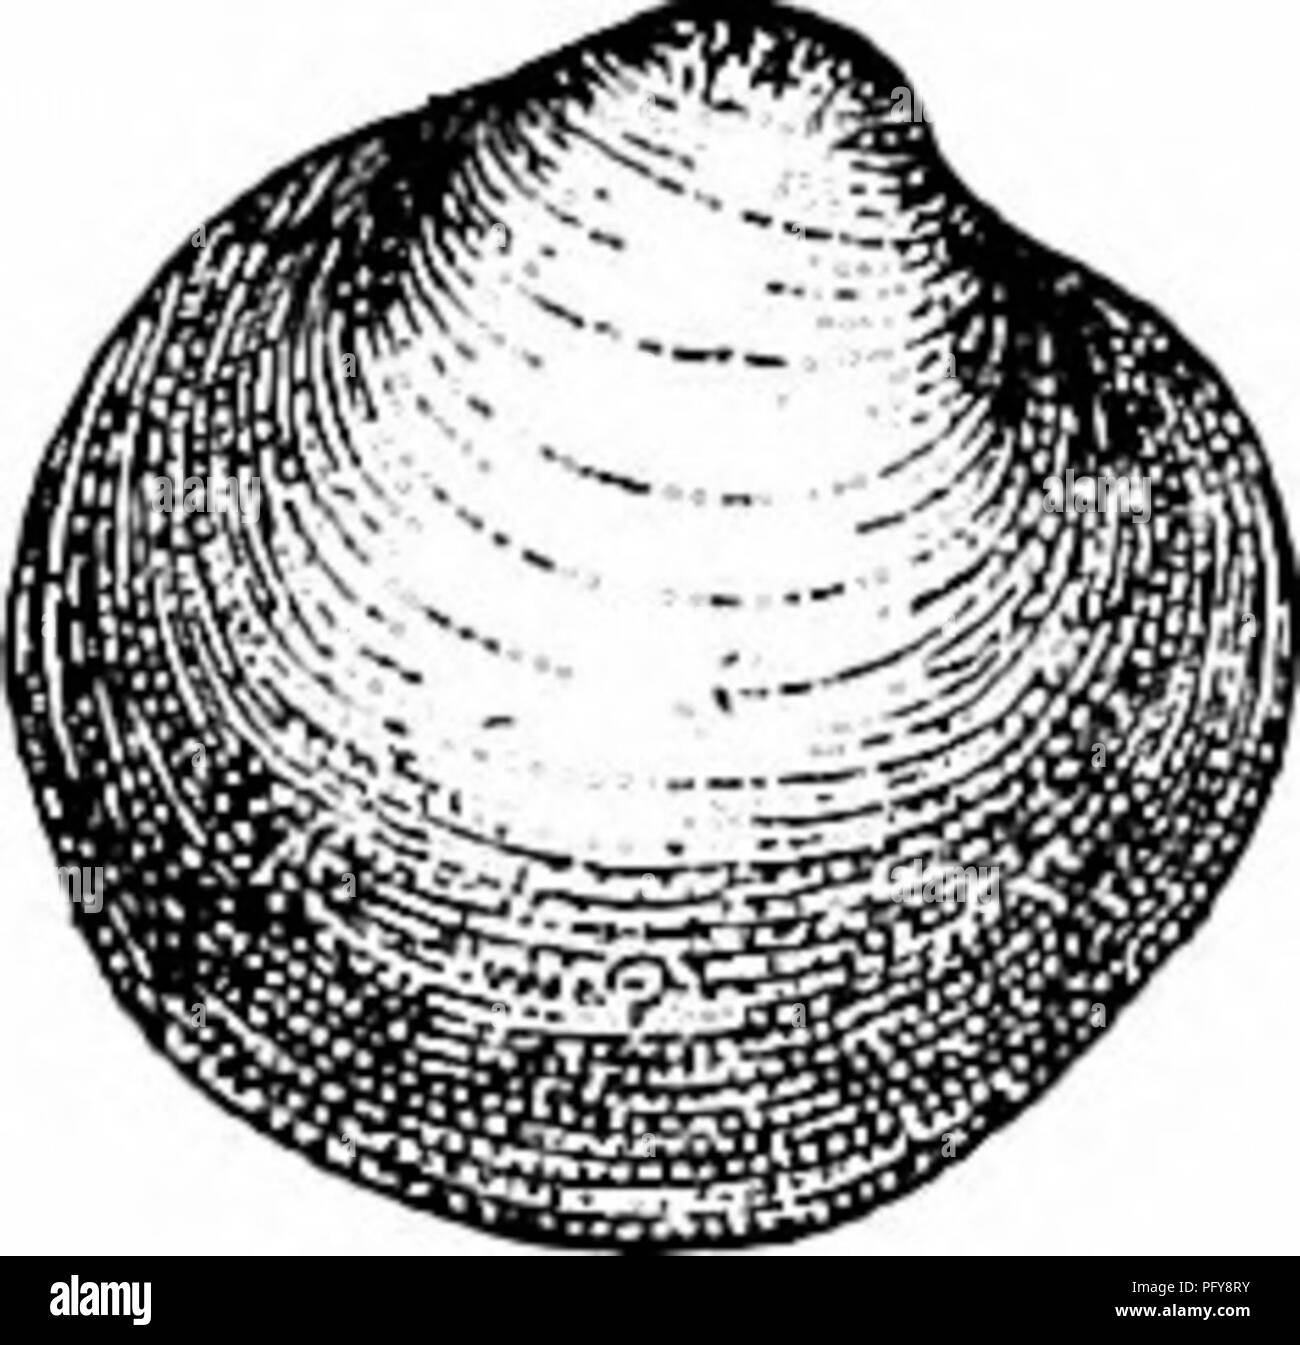 . Fresh-water biology. Freshwater biology. This group has a general distribution. The prominent beaks with the distinctly mari^ed nepeonic shell are the distinctive feature, but in some species these are lacking. The thin, rounded, polished shell is, however, quite characteristic. E.xample, M. partumeium Say (Fig. Fig. 1530. 171 (172) Shell subrhomboidal, thin, moderately inflated, with the posterior side longer; cardinal teeth feeble, only one in each valve. Eupera Bourguignat. A tropical group, of which two or three species occur in Florida, Ala- bama, and Te.xas. The rhomboidal shape is cha Stock Photo